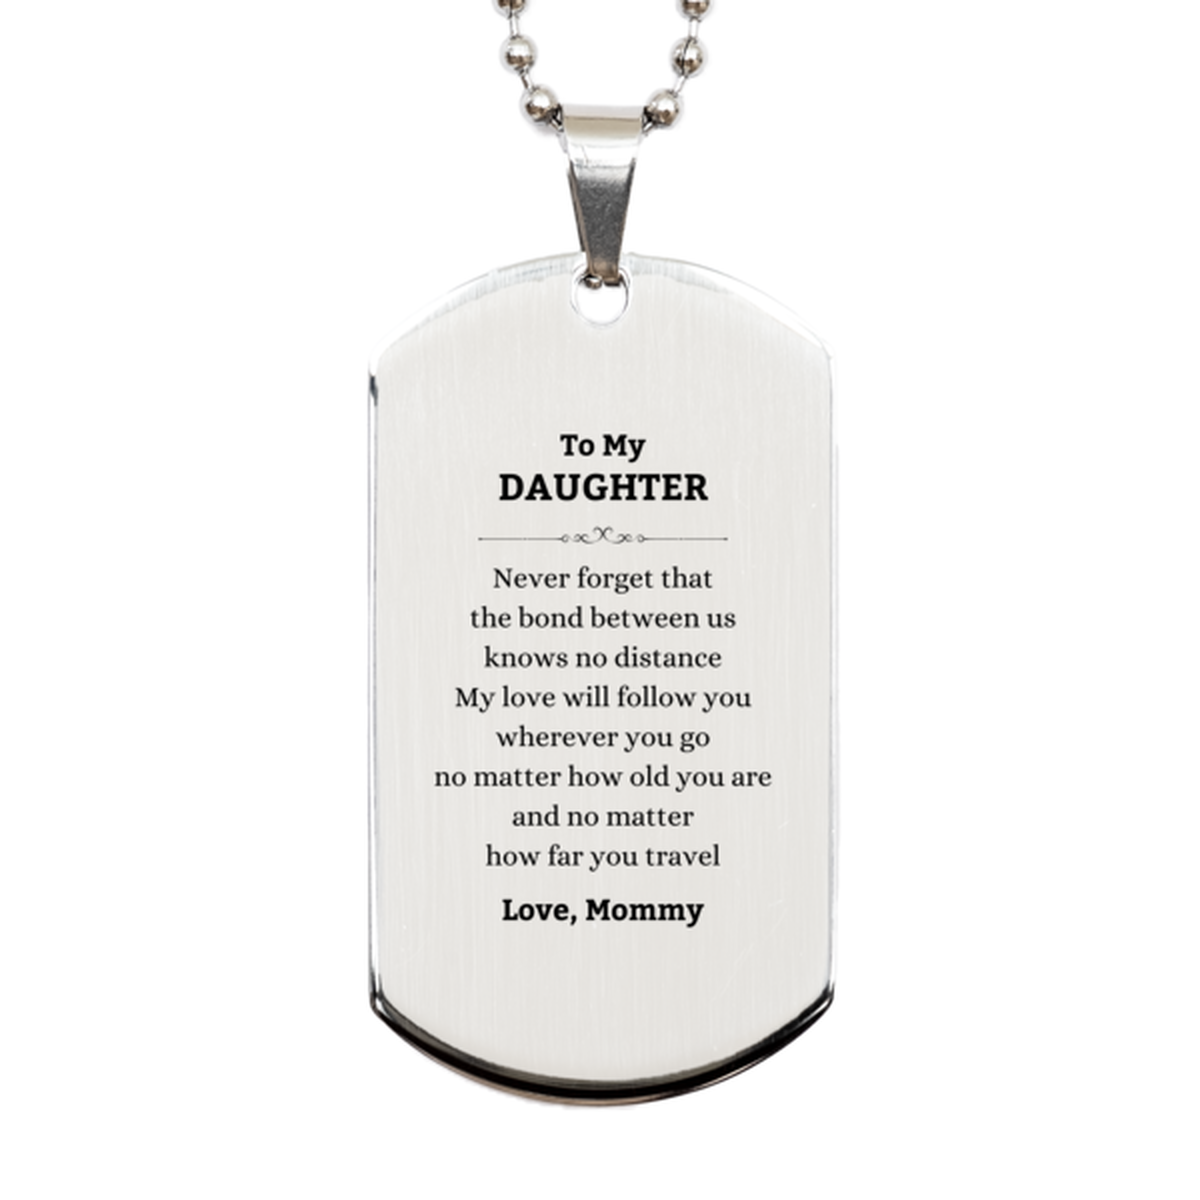 Daughter Birthday Gifts from Mommy, Adjustable Silver Dog Tag for Daughter Christmas Graduation Unique Gifts Daughter Never forget that the bond between us knows no distance. Love, Mommy